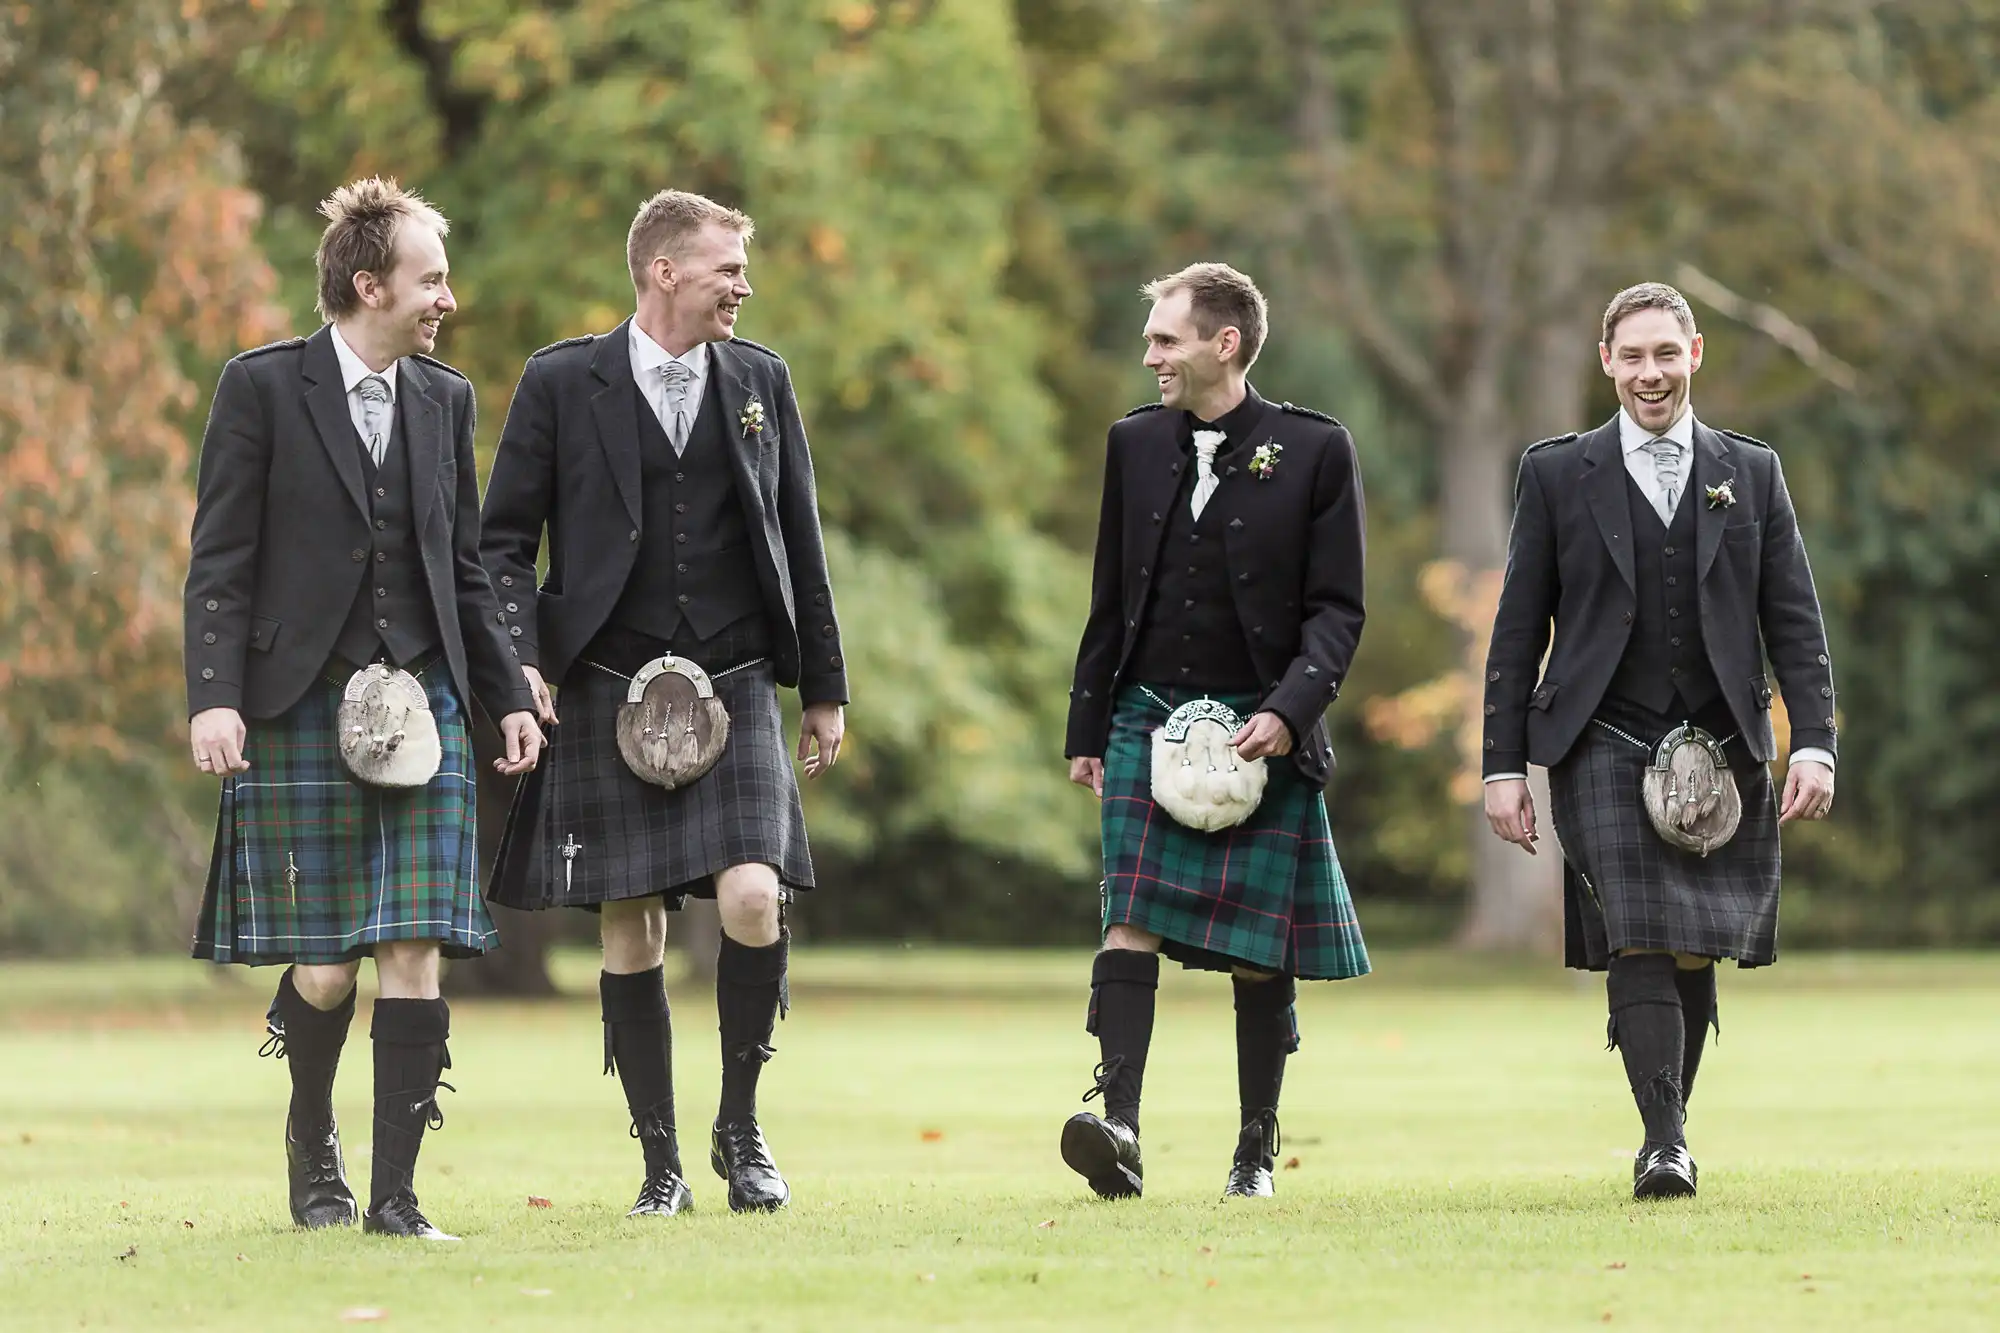 Four men wearing traditional scottish kilts, laughing and walking together on a grassy field.